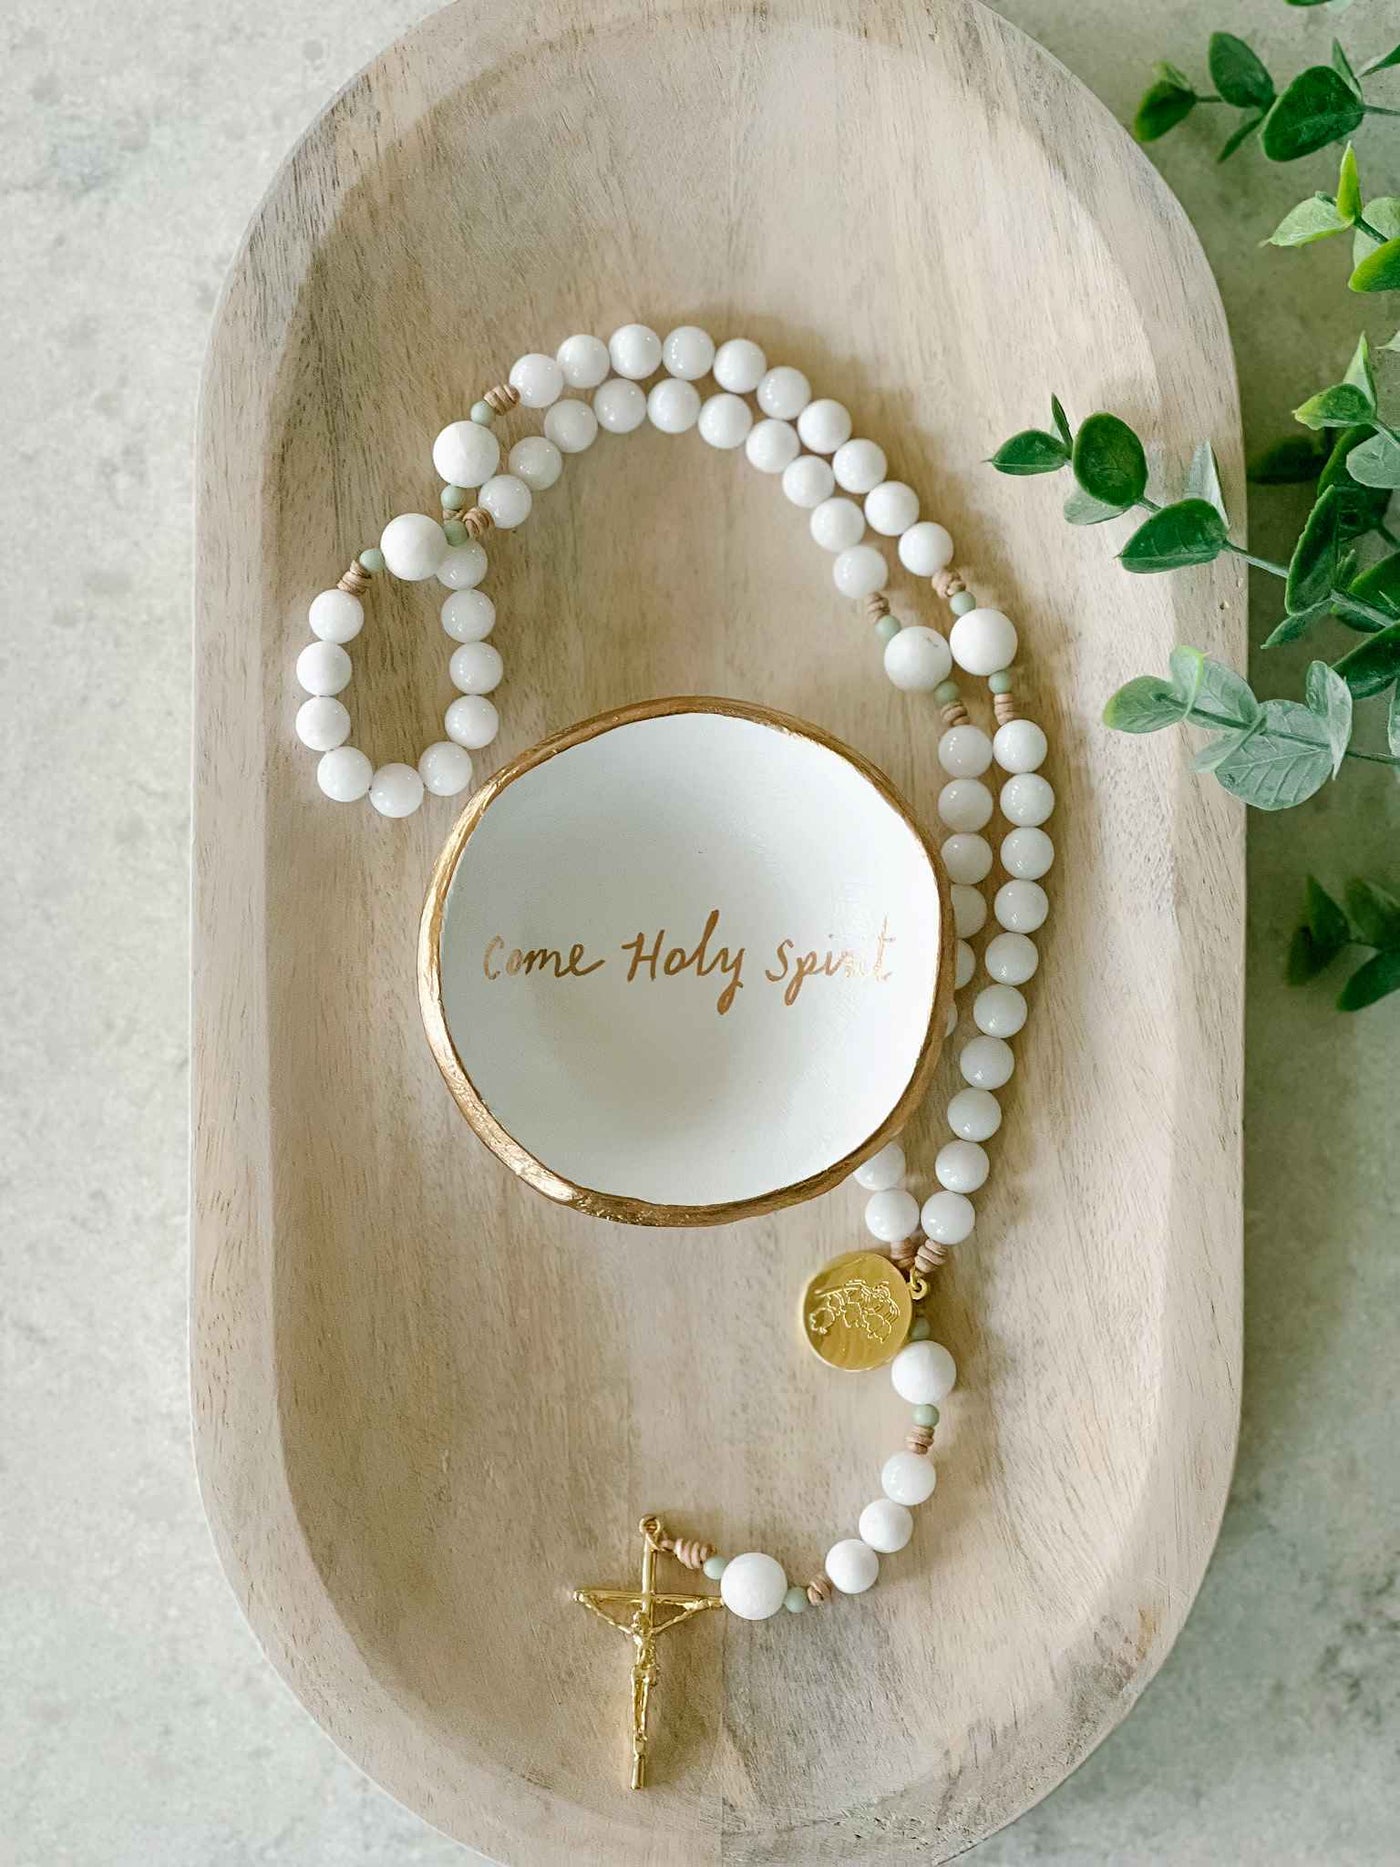 Come Holy Spirit Rosary Dish